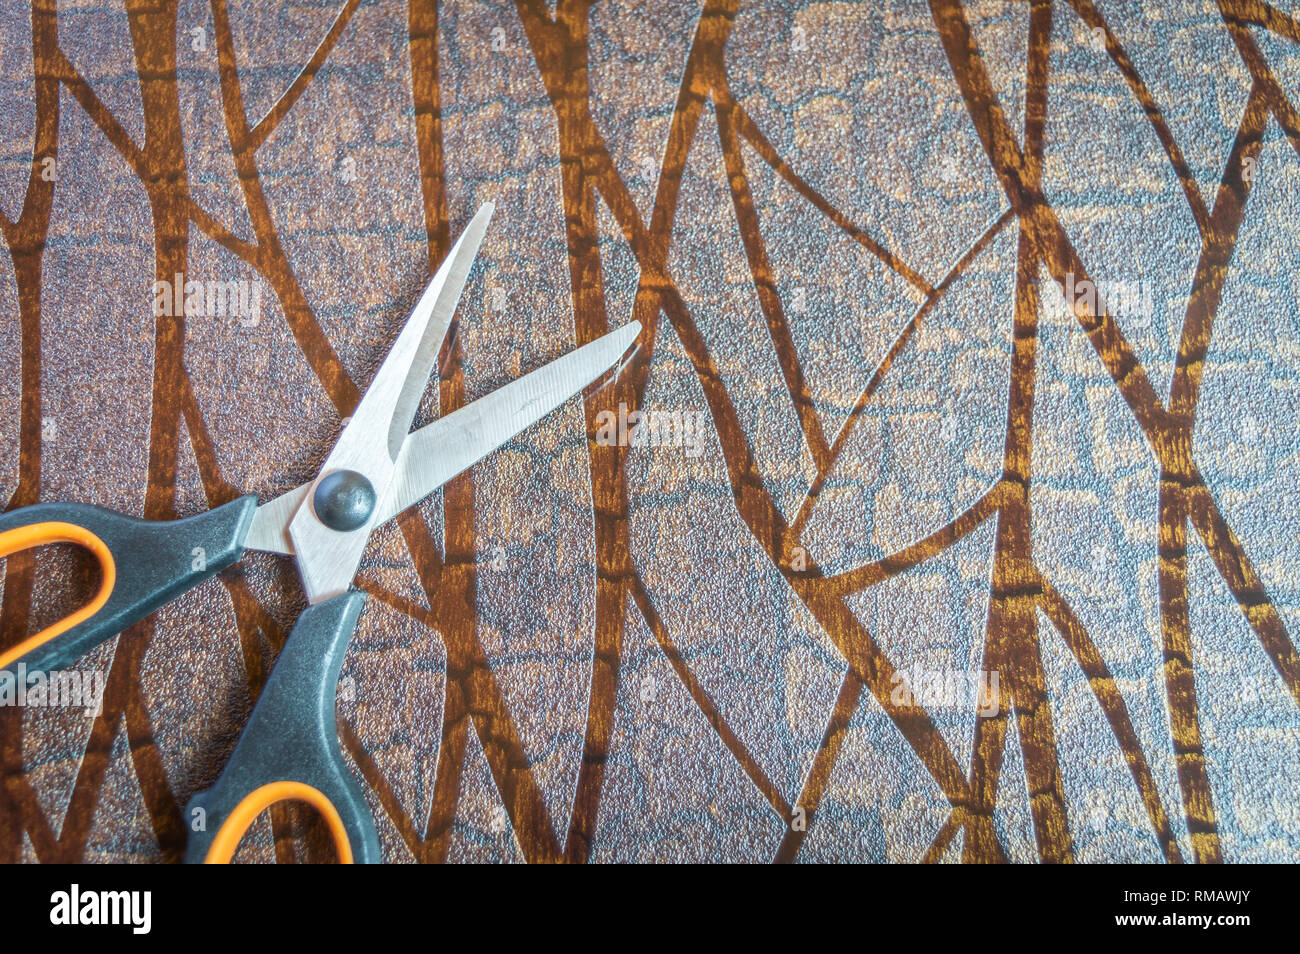 top view of a pair of scissors kept on a textured brown table. Copy space provided Stock Photo